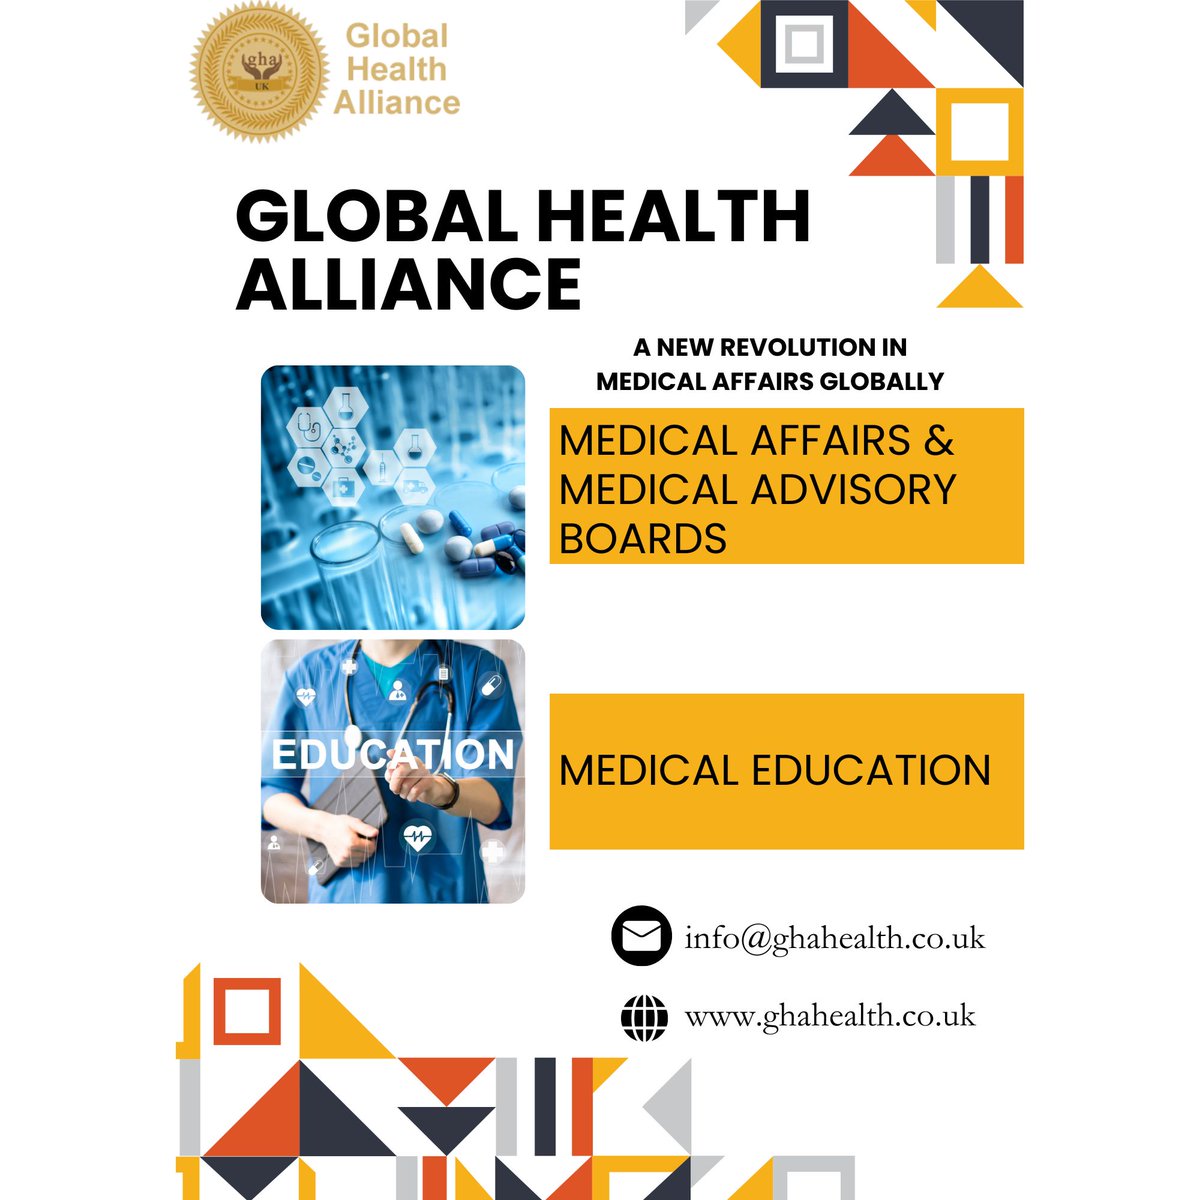 New #Revolution in #Medical #Affairs #Globally 
@GhaHealth

#Medical #affairs
#healthcare #mnc #pharma #Medical #arabhealth #Knowledge #Innovation #HealthTech #HealthForAll #MedEd #nurses #Doctors #Hospitals  #pharmaceuticals #affairs #Medicalservices #MedTwitter